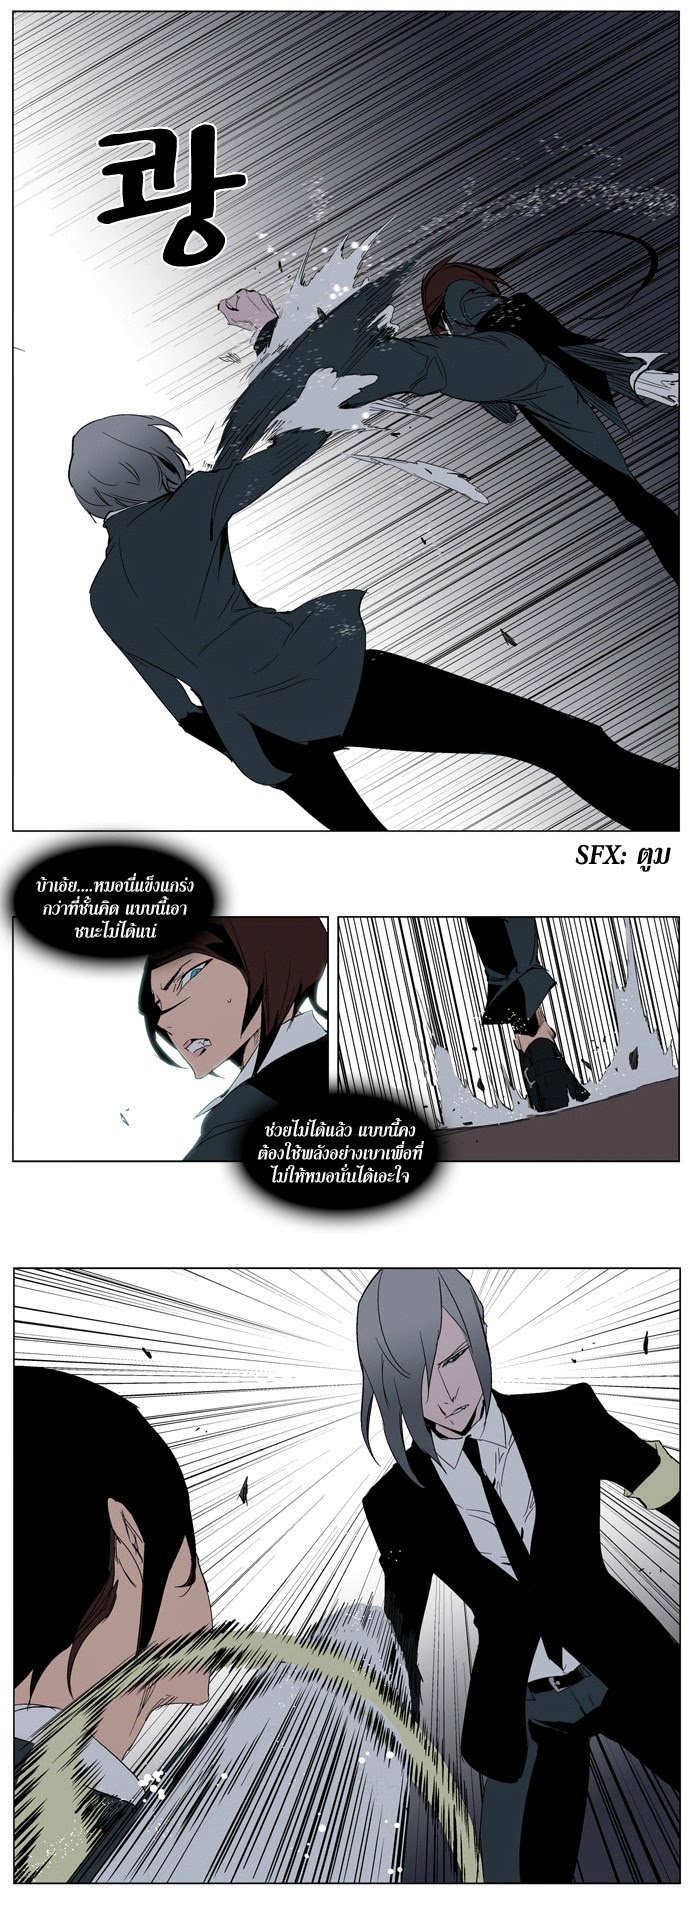 Noblesse 213 012